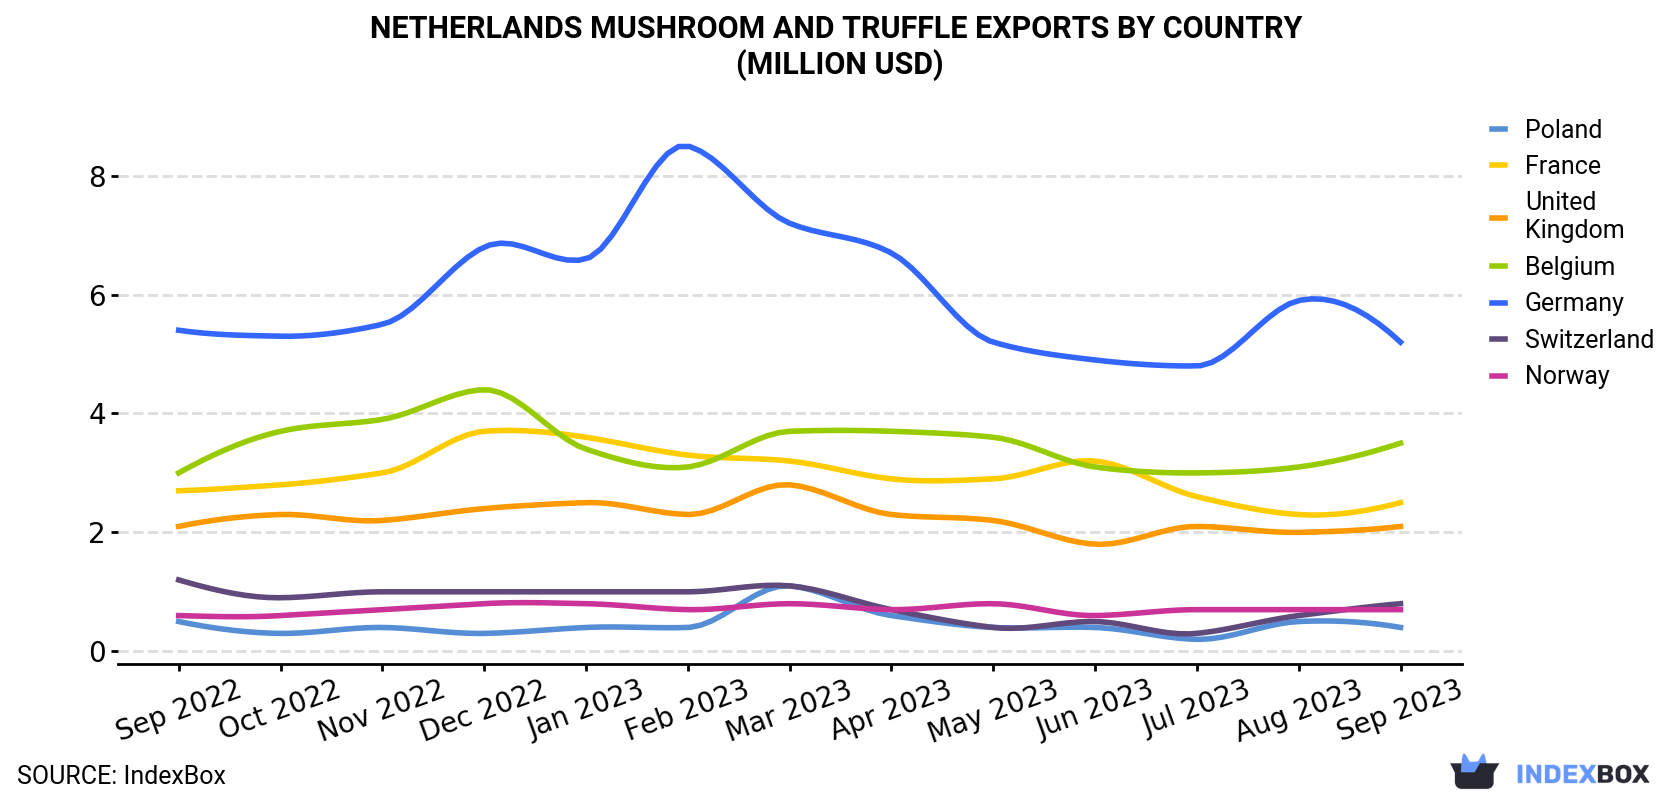 Netherlands Mushroom And Truffle Exports By Country (Million USD)